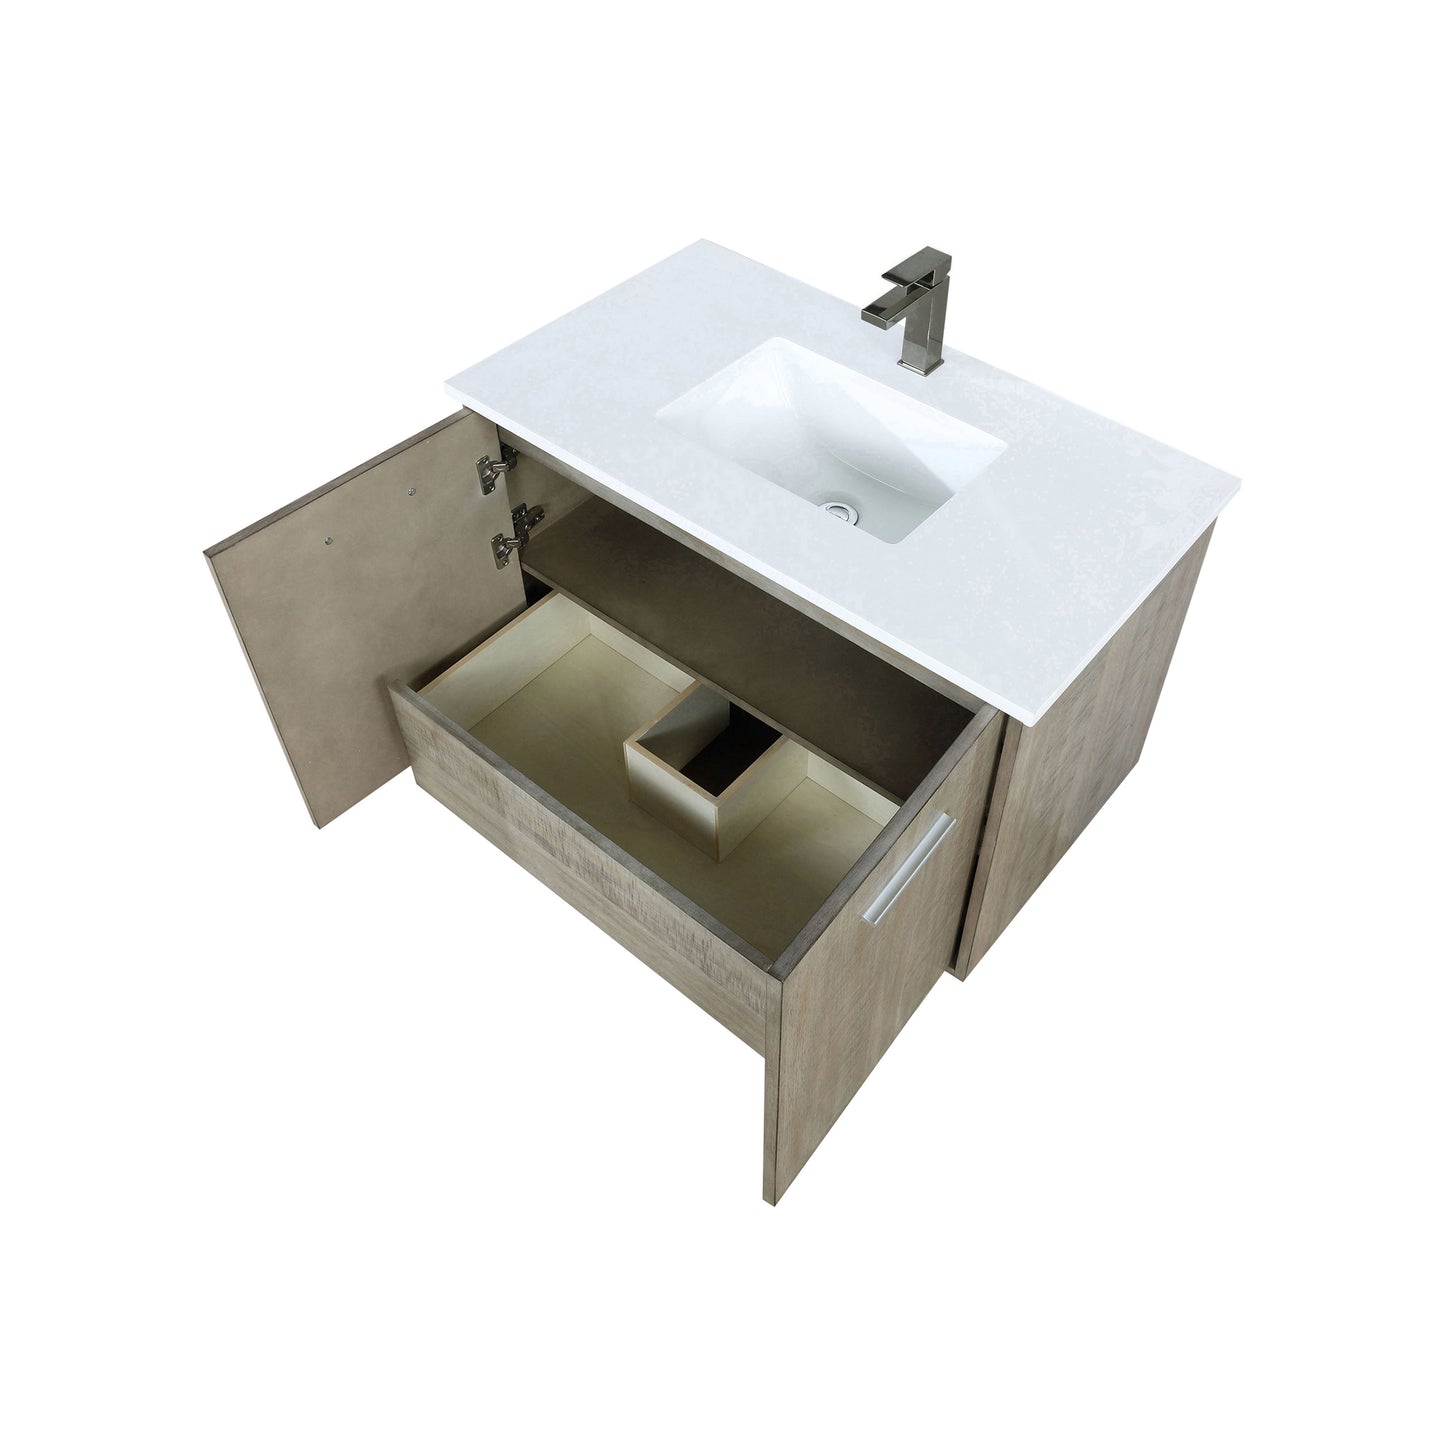 Lexora Collection Fairbanks 36 inch Rustic Acacia Bath Vanity, Cultured Marble Top and Faucet Set - Luxe Bathroom Vanities